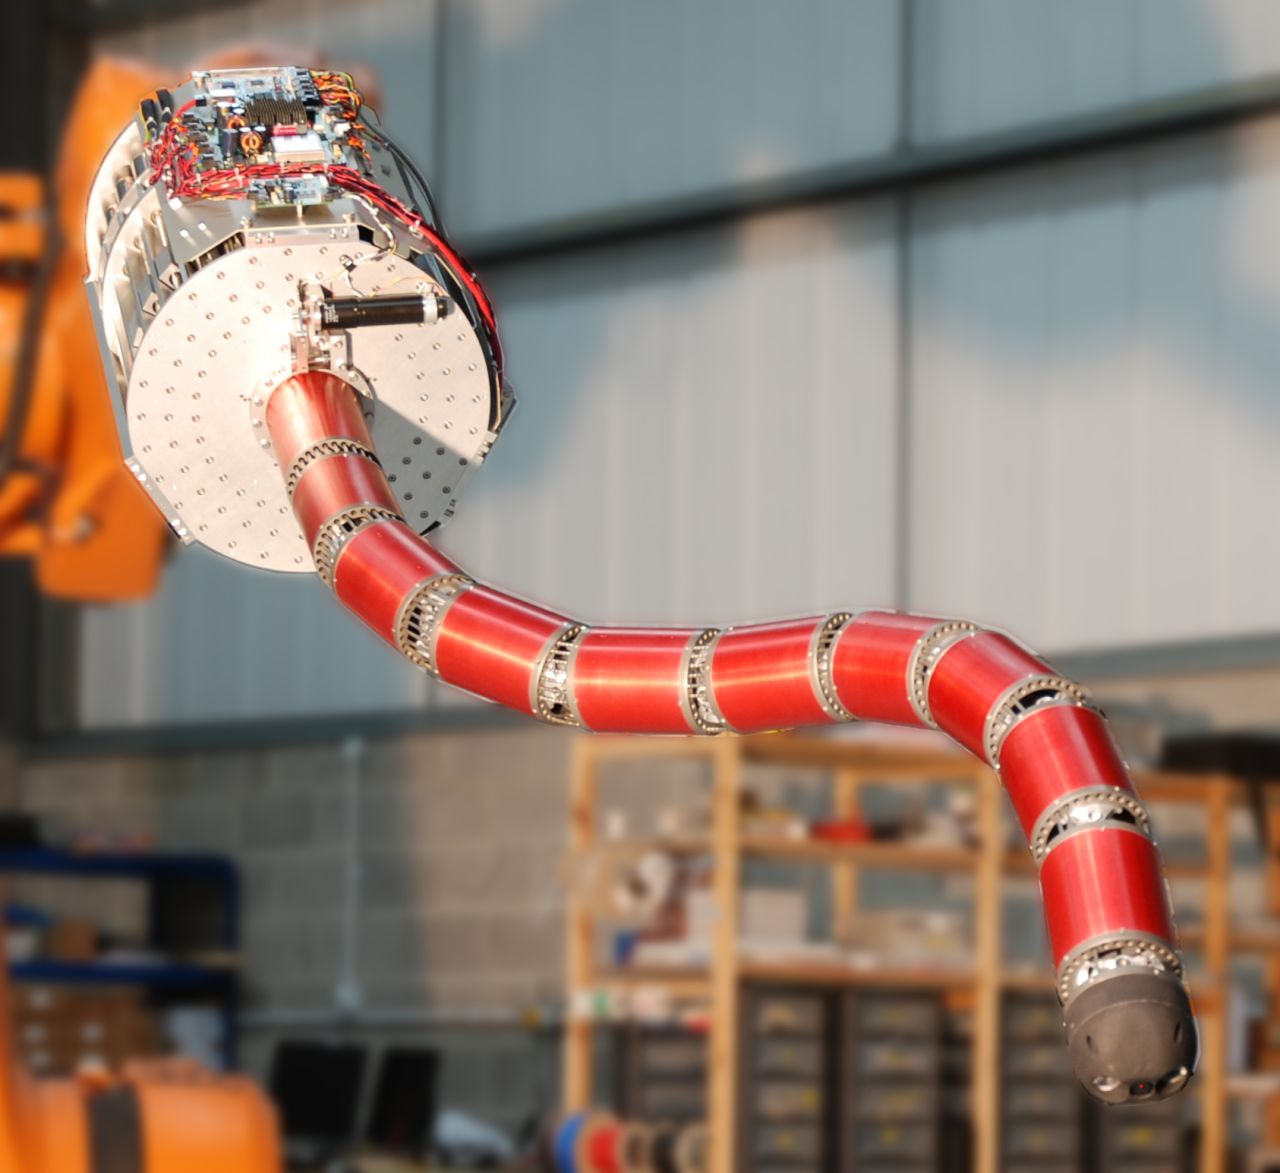 The snake-arm robot can "reach the unreachable" say its creators.